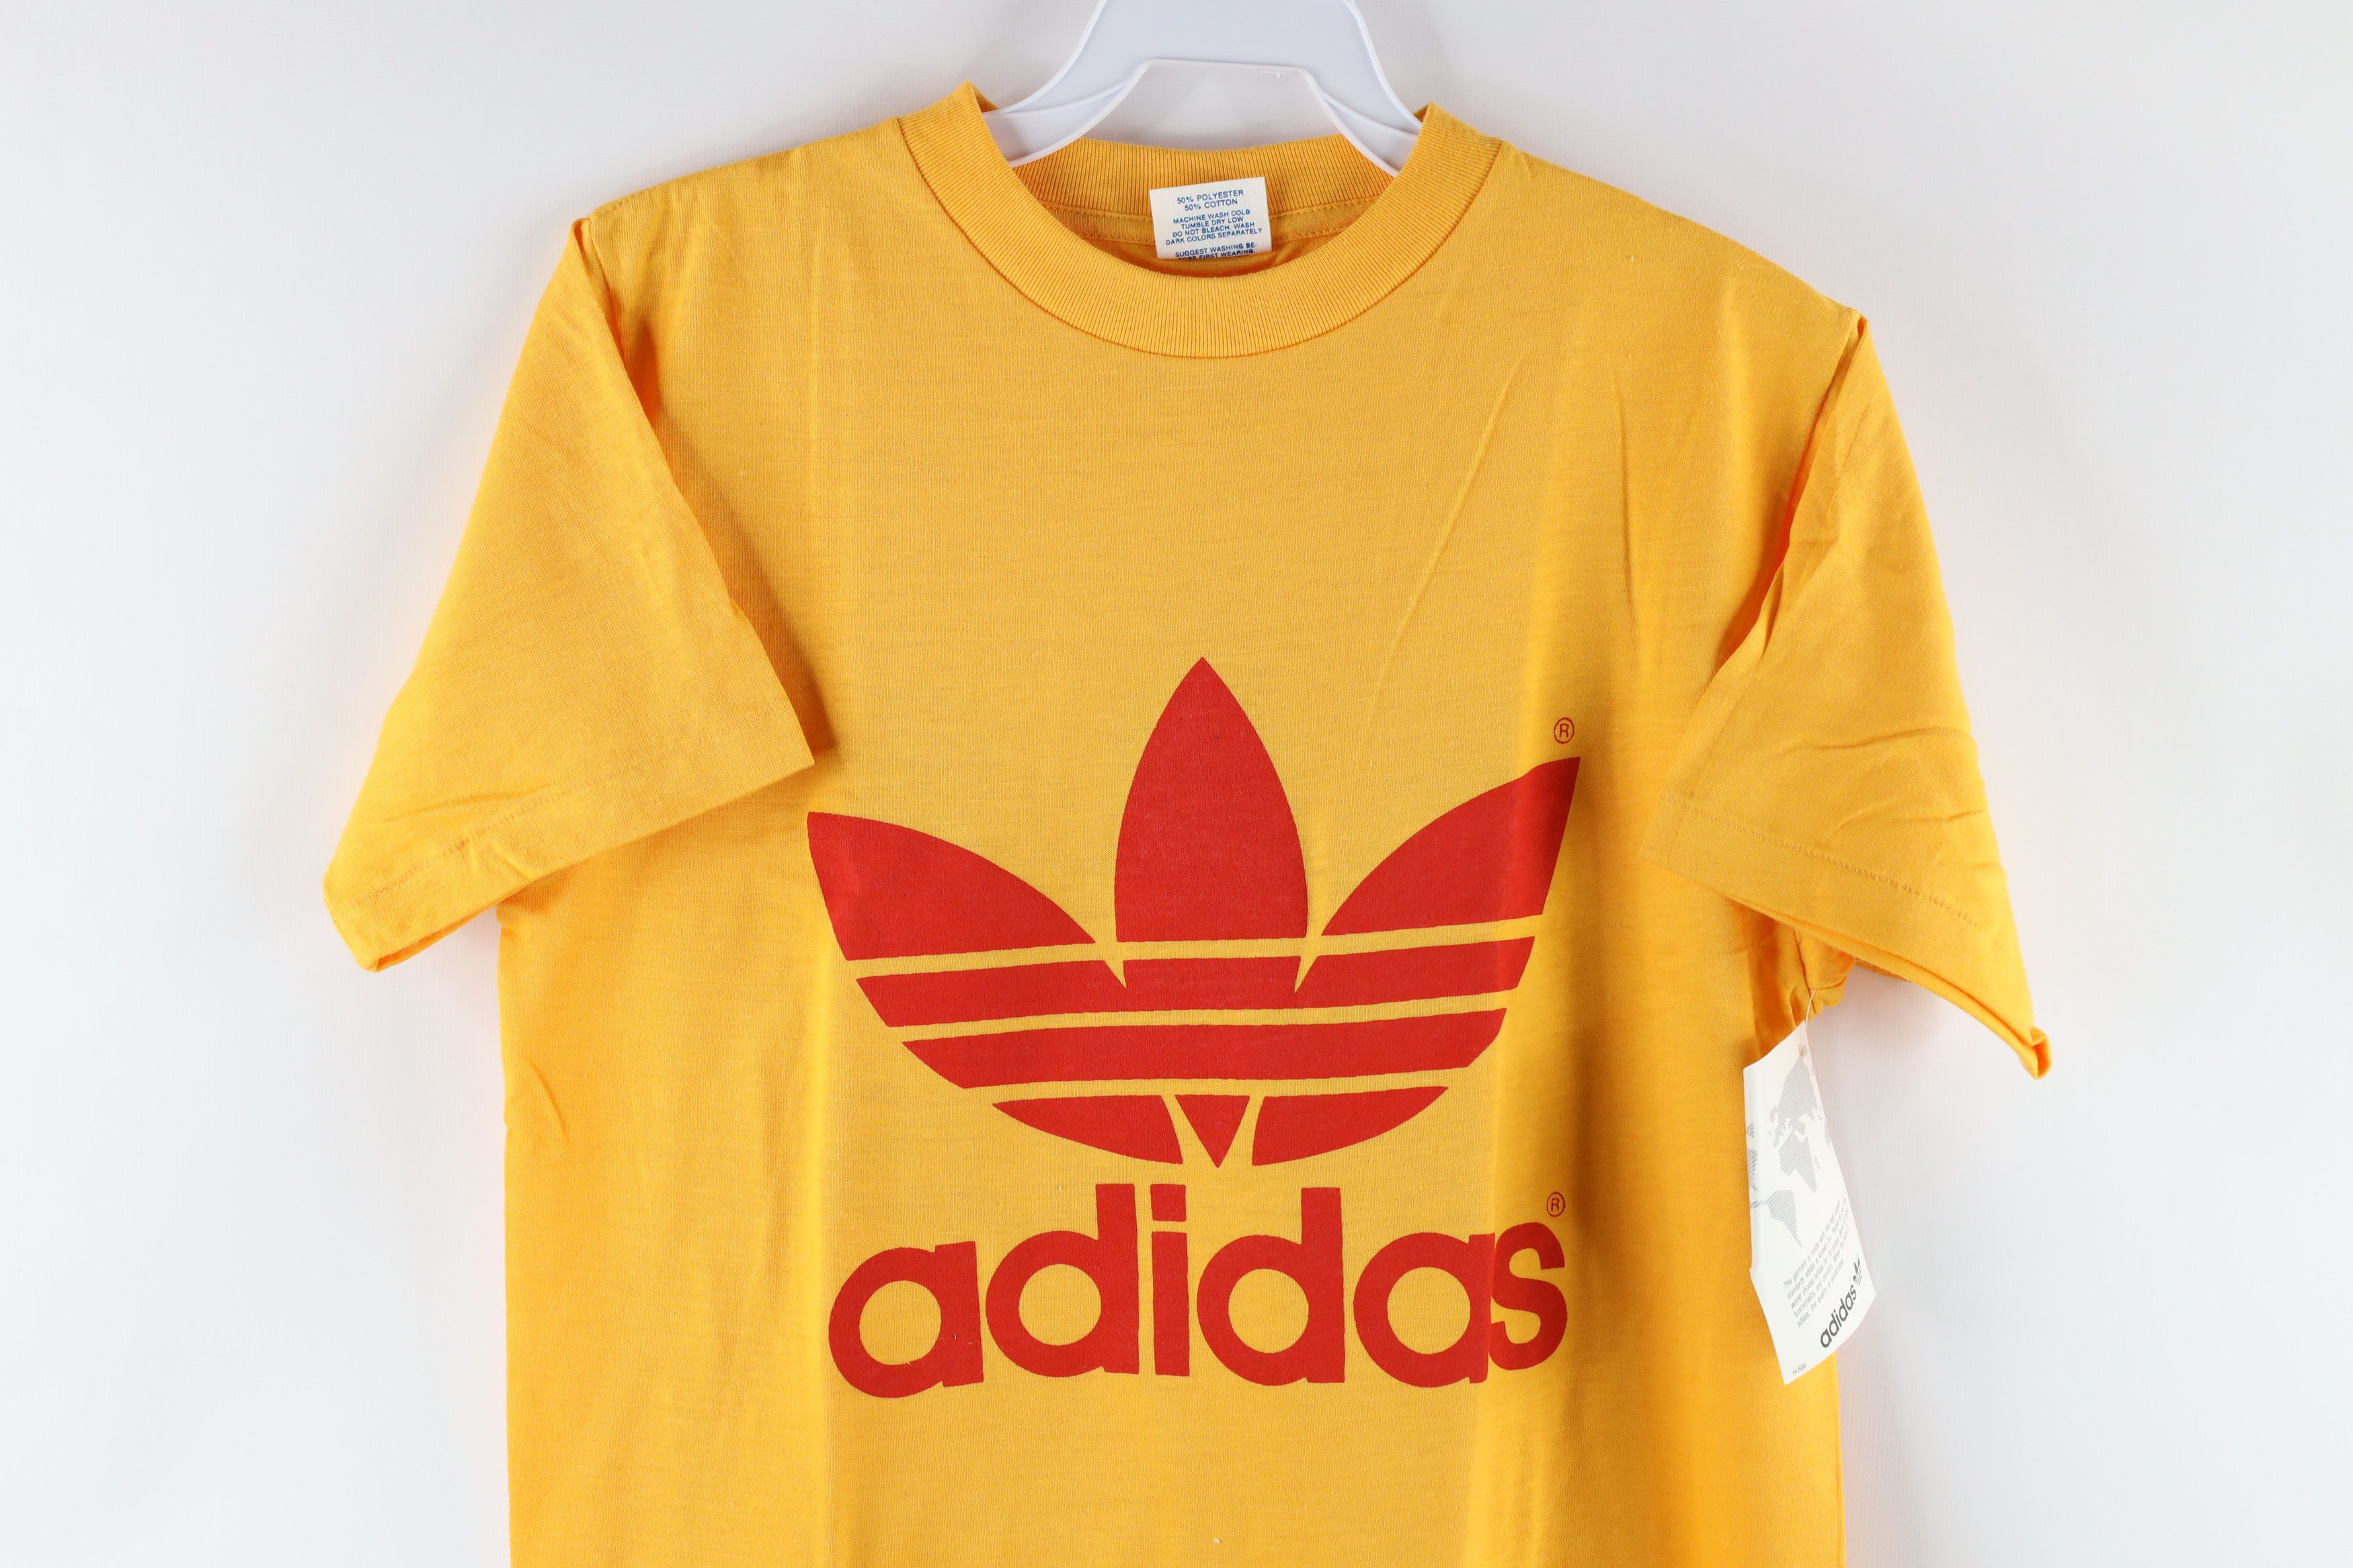 Adidas NOS Vintage 80s Adidas Trefoil 1988 Olympics T-Shirt Yellow Size US S / EU 44-46 / 1 - 2 Preview